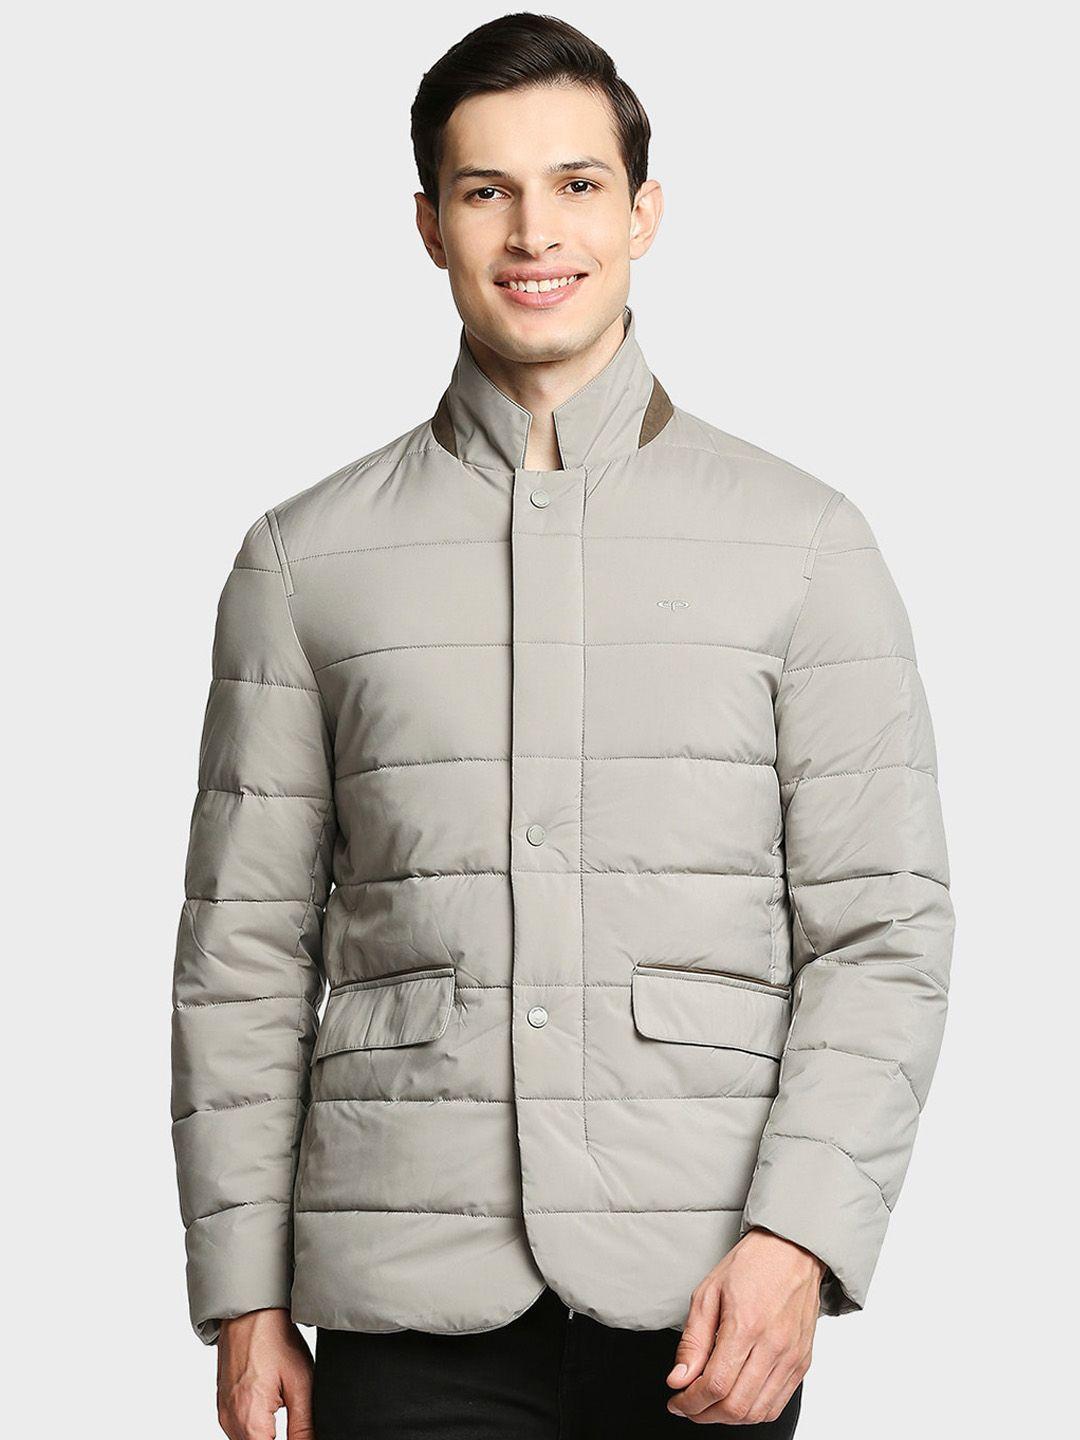 colorplus men beige padded jacket with embroidered